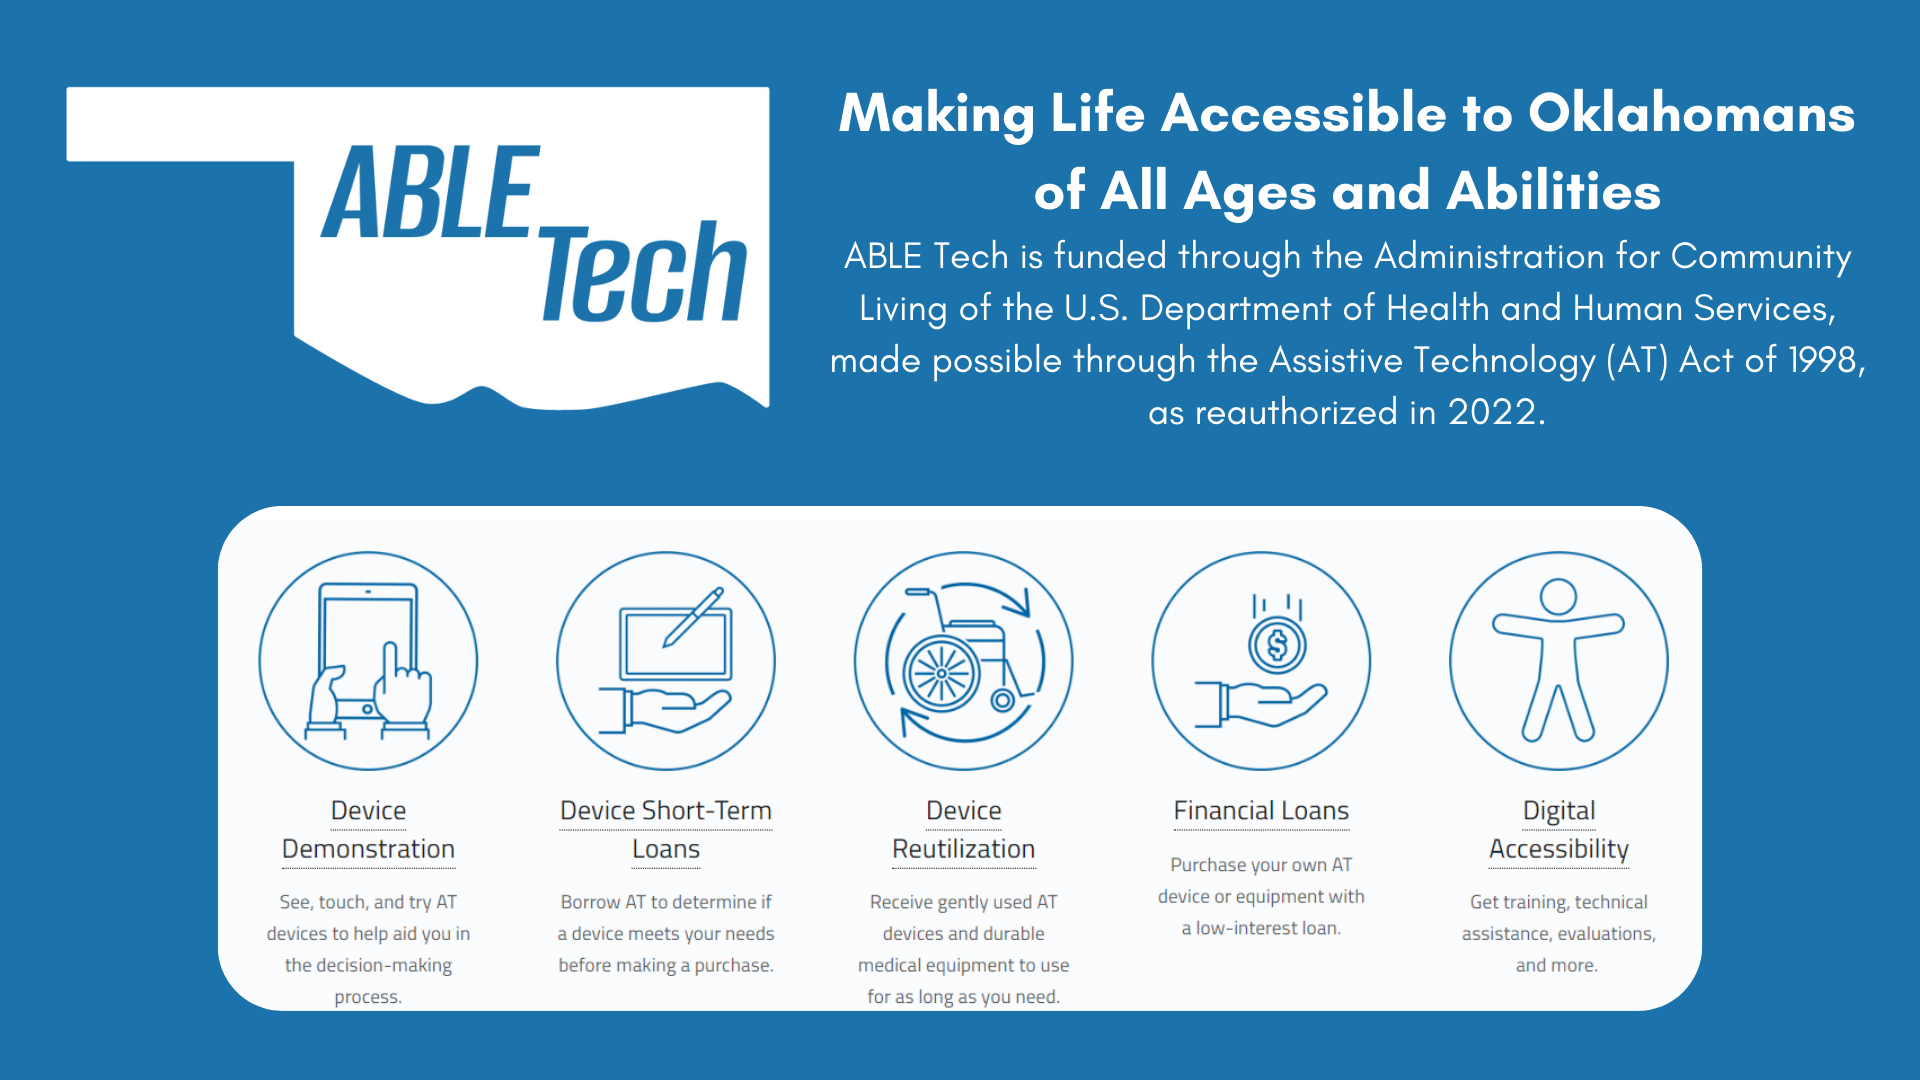 Oklahoma AbleTech. Making Life Accessible to Oklahomans of All Ages and Abilities - click to redirect to the Oklahoma ABLE Tech website.